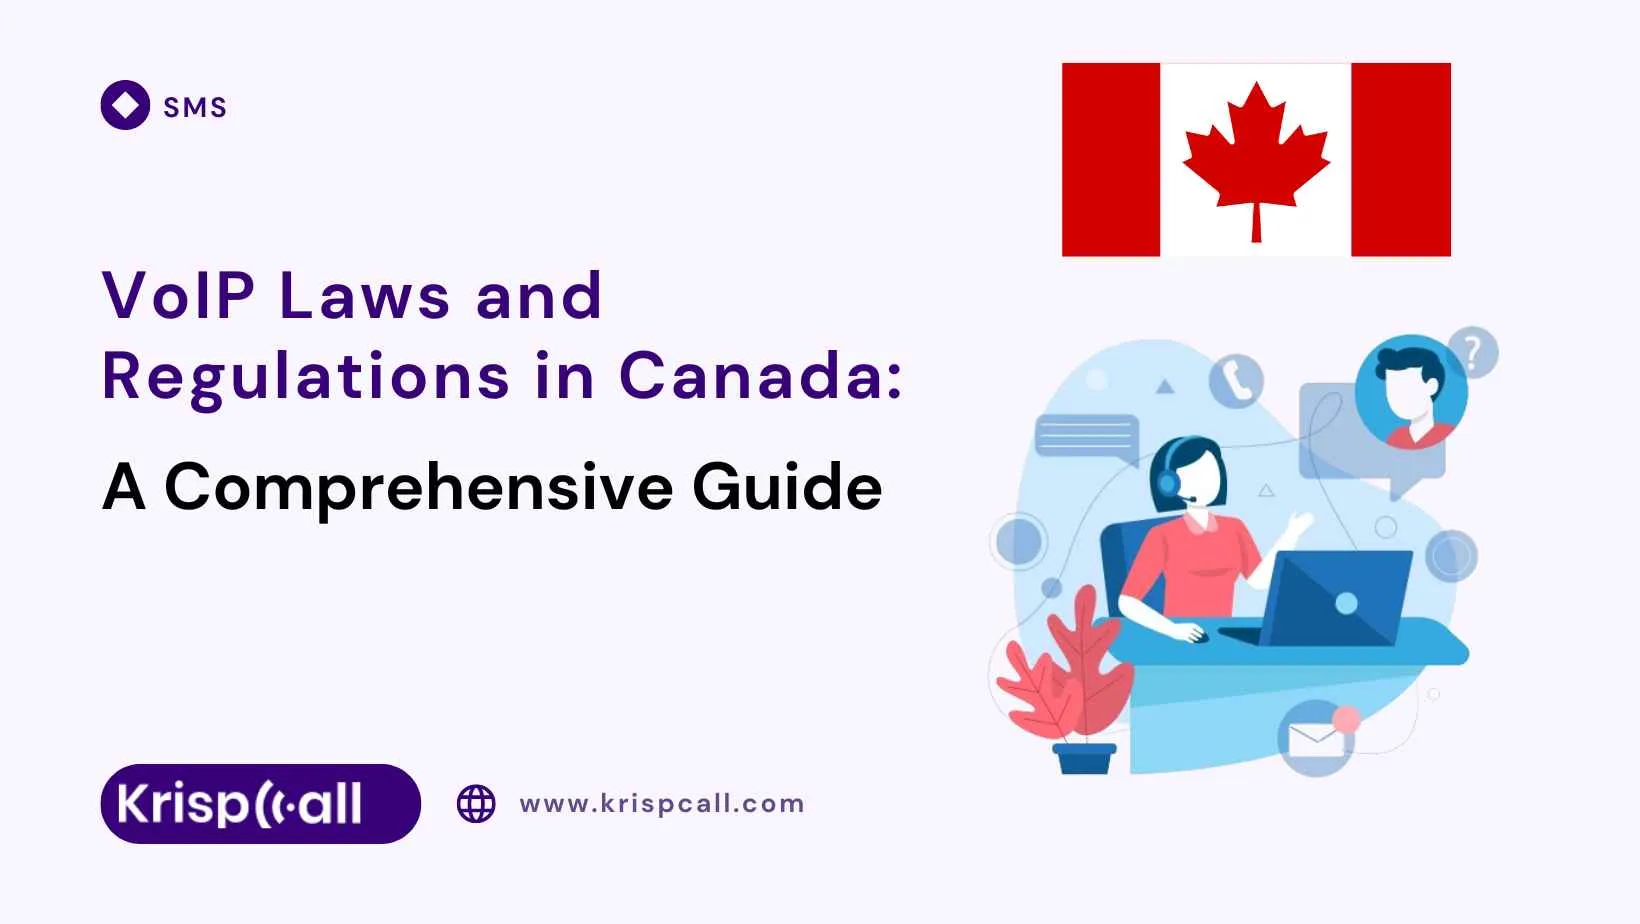 VoIP Laws and Regulations in Canada A Comprehensive Guide